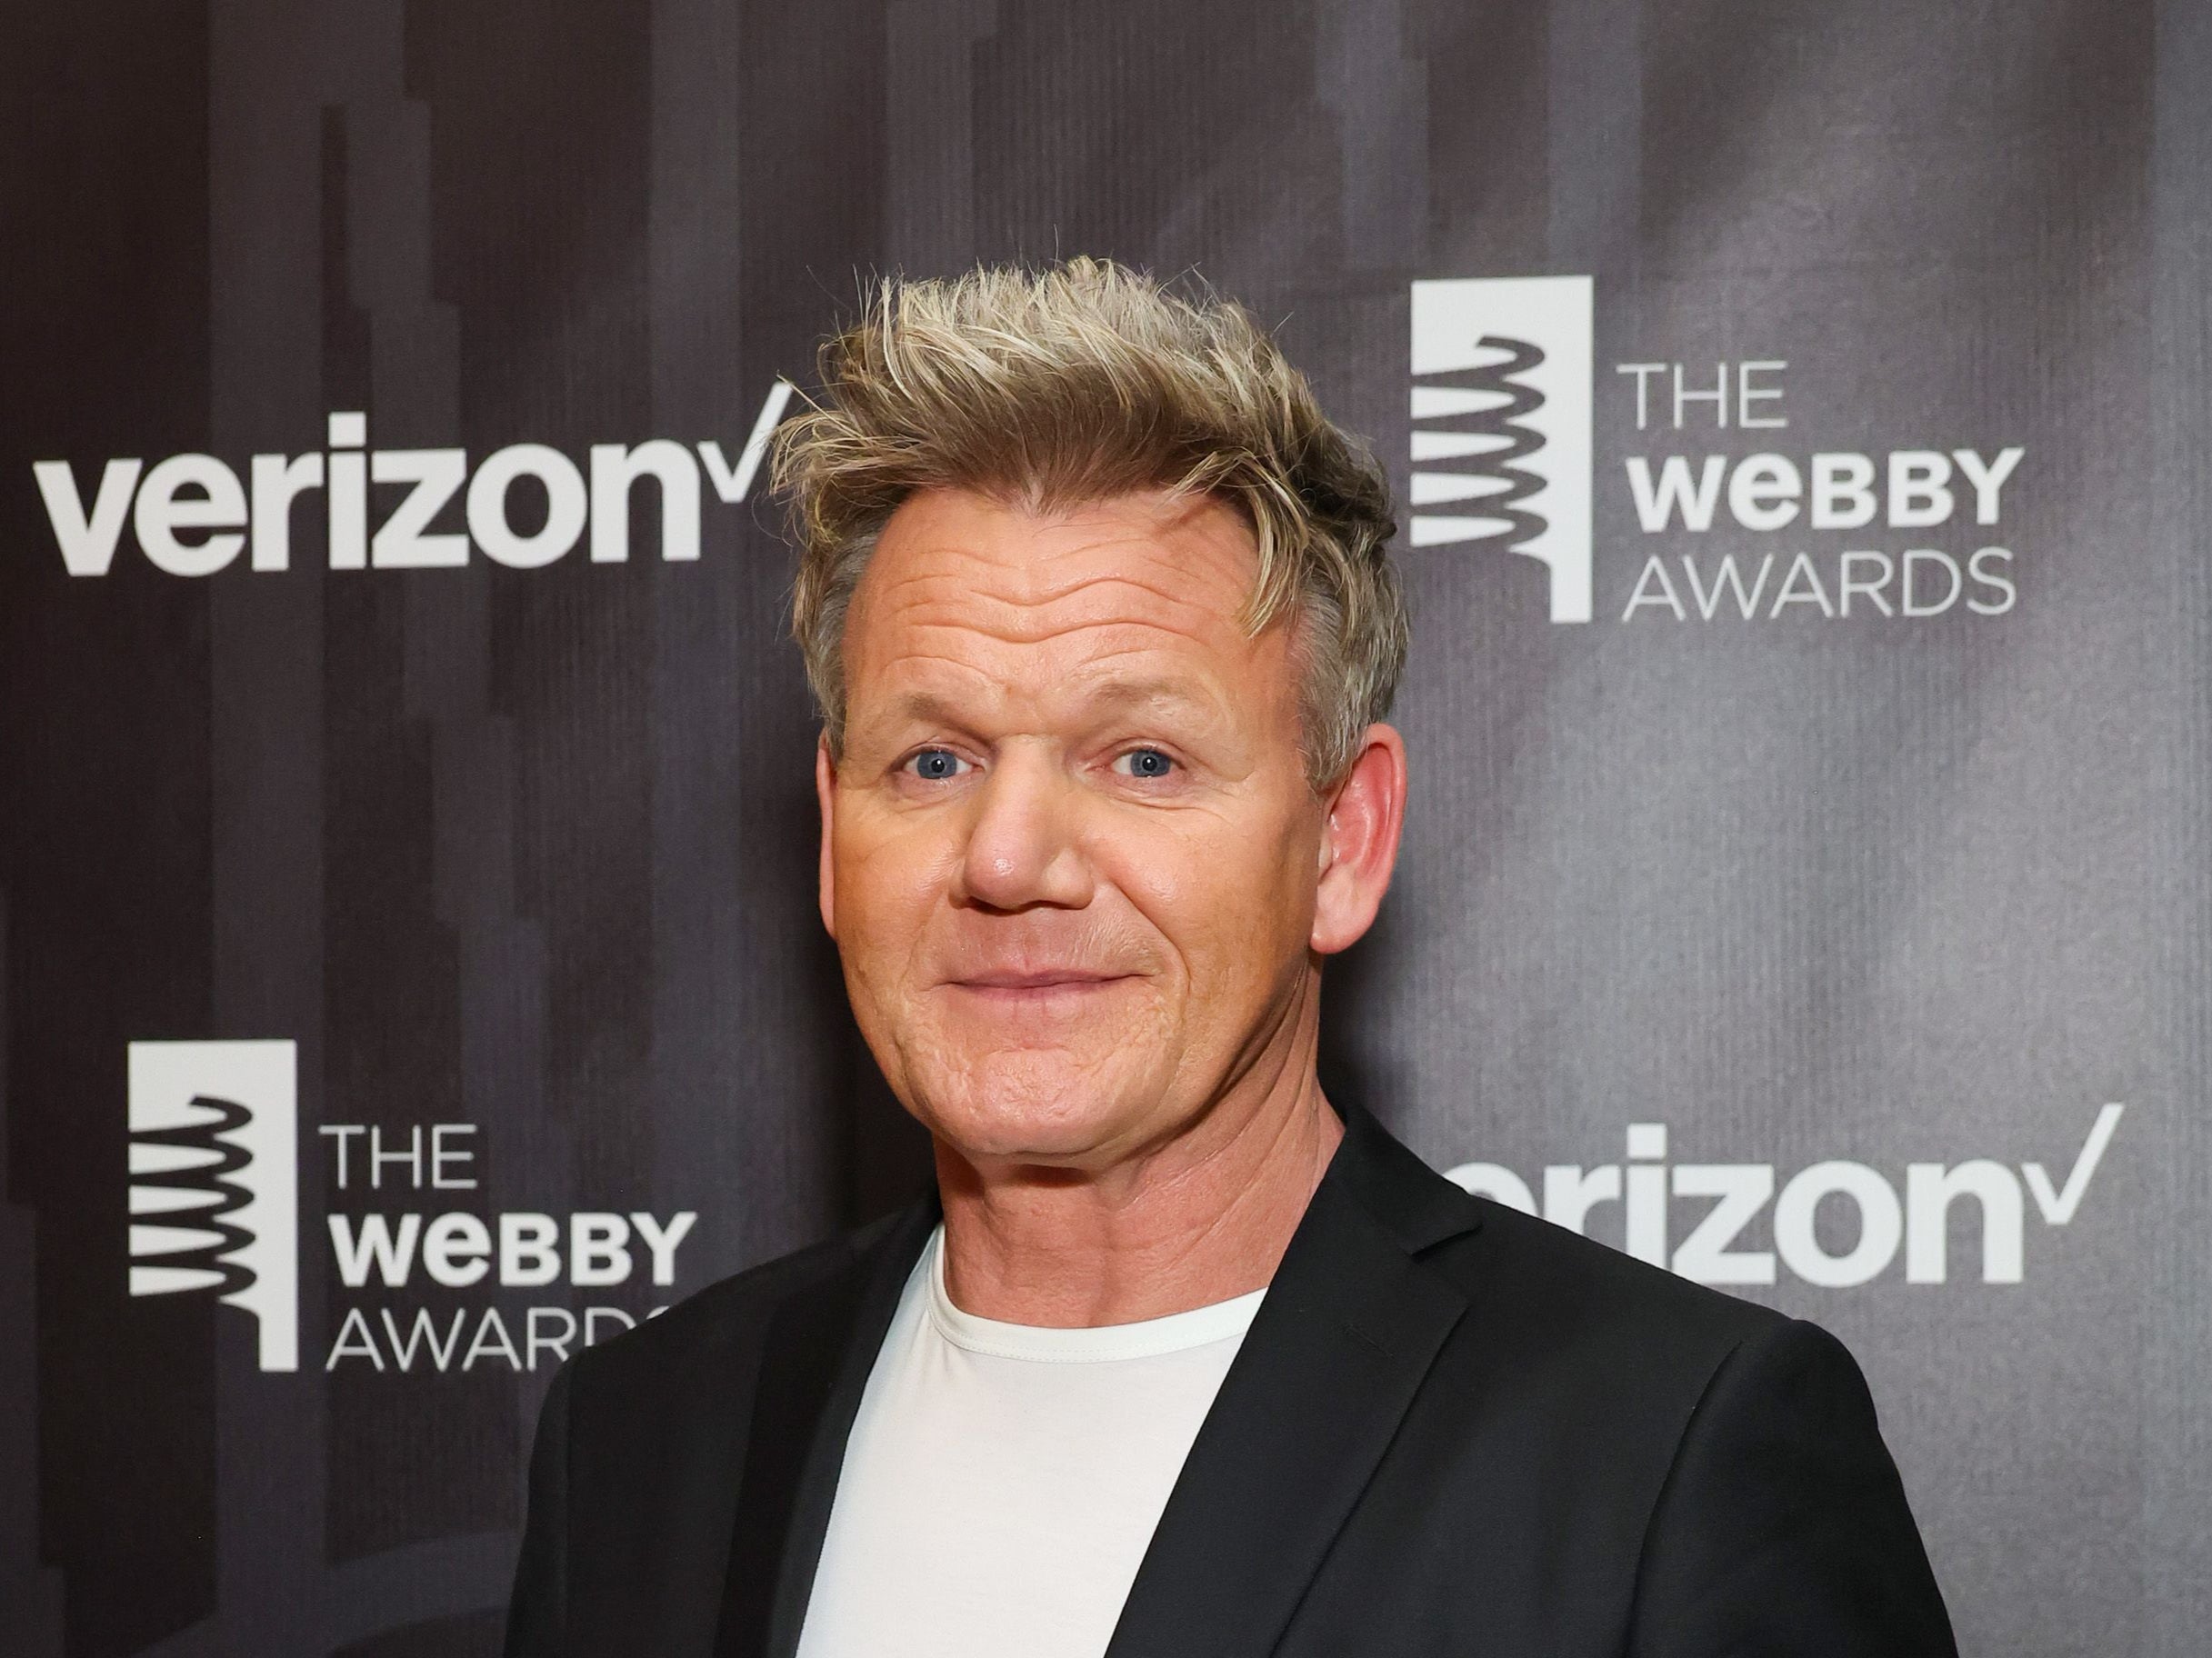 Gordon Ramsay opens up about death of son Rocky in 2016 It brought us a bond as a family The Independent pic